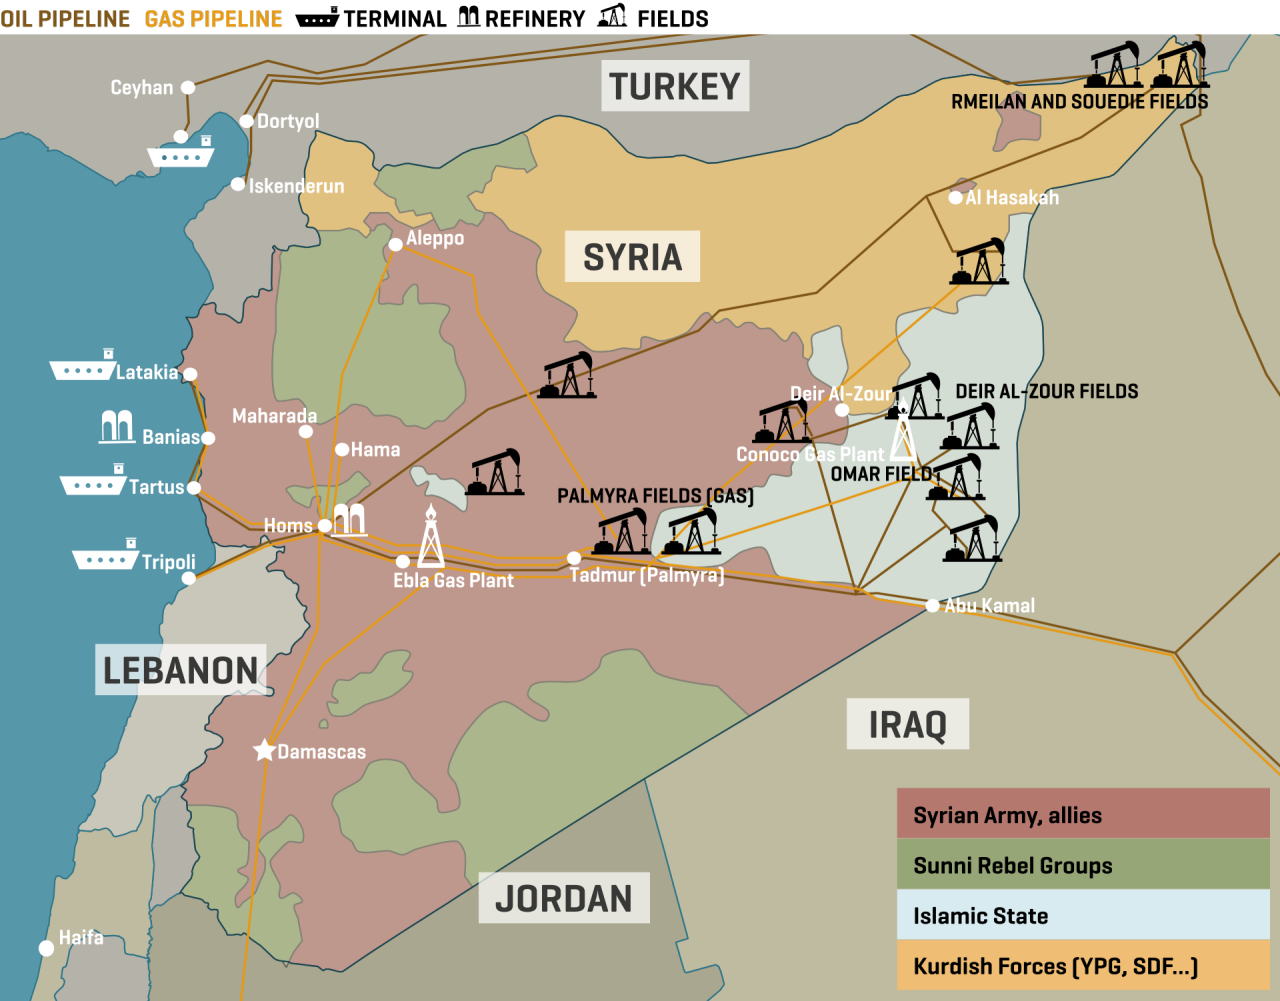 Syria’s Energy Infrastructure. Political Division As Of September 29